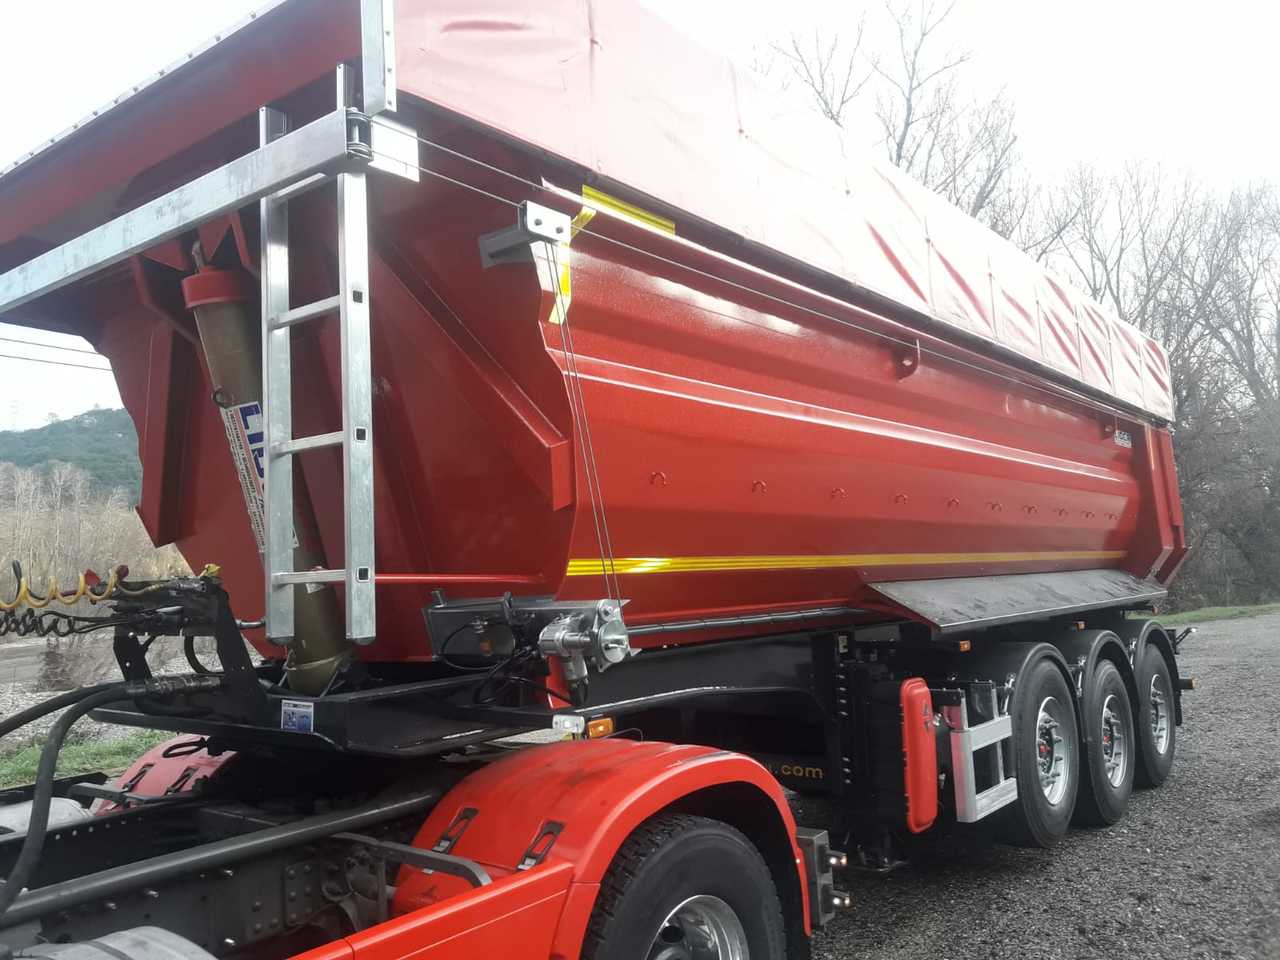 LIDER 2022 MODELS YEAR NEW (MANUFACTURER COMPANY LIDER TRAILER & TANKER – Leasing LIDER 2022 MODELS YEAR NEW (MANUFACTURER COMPANY LIDER TRAILER & TANKER: das Bild 3